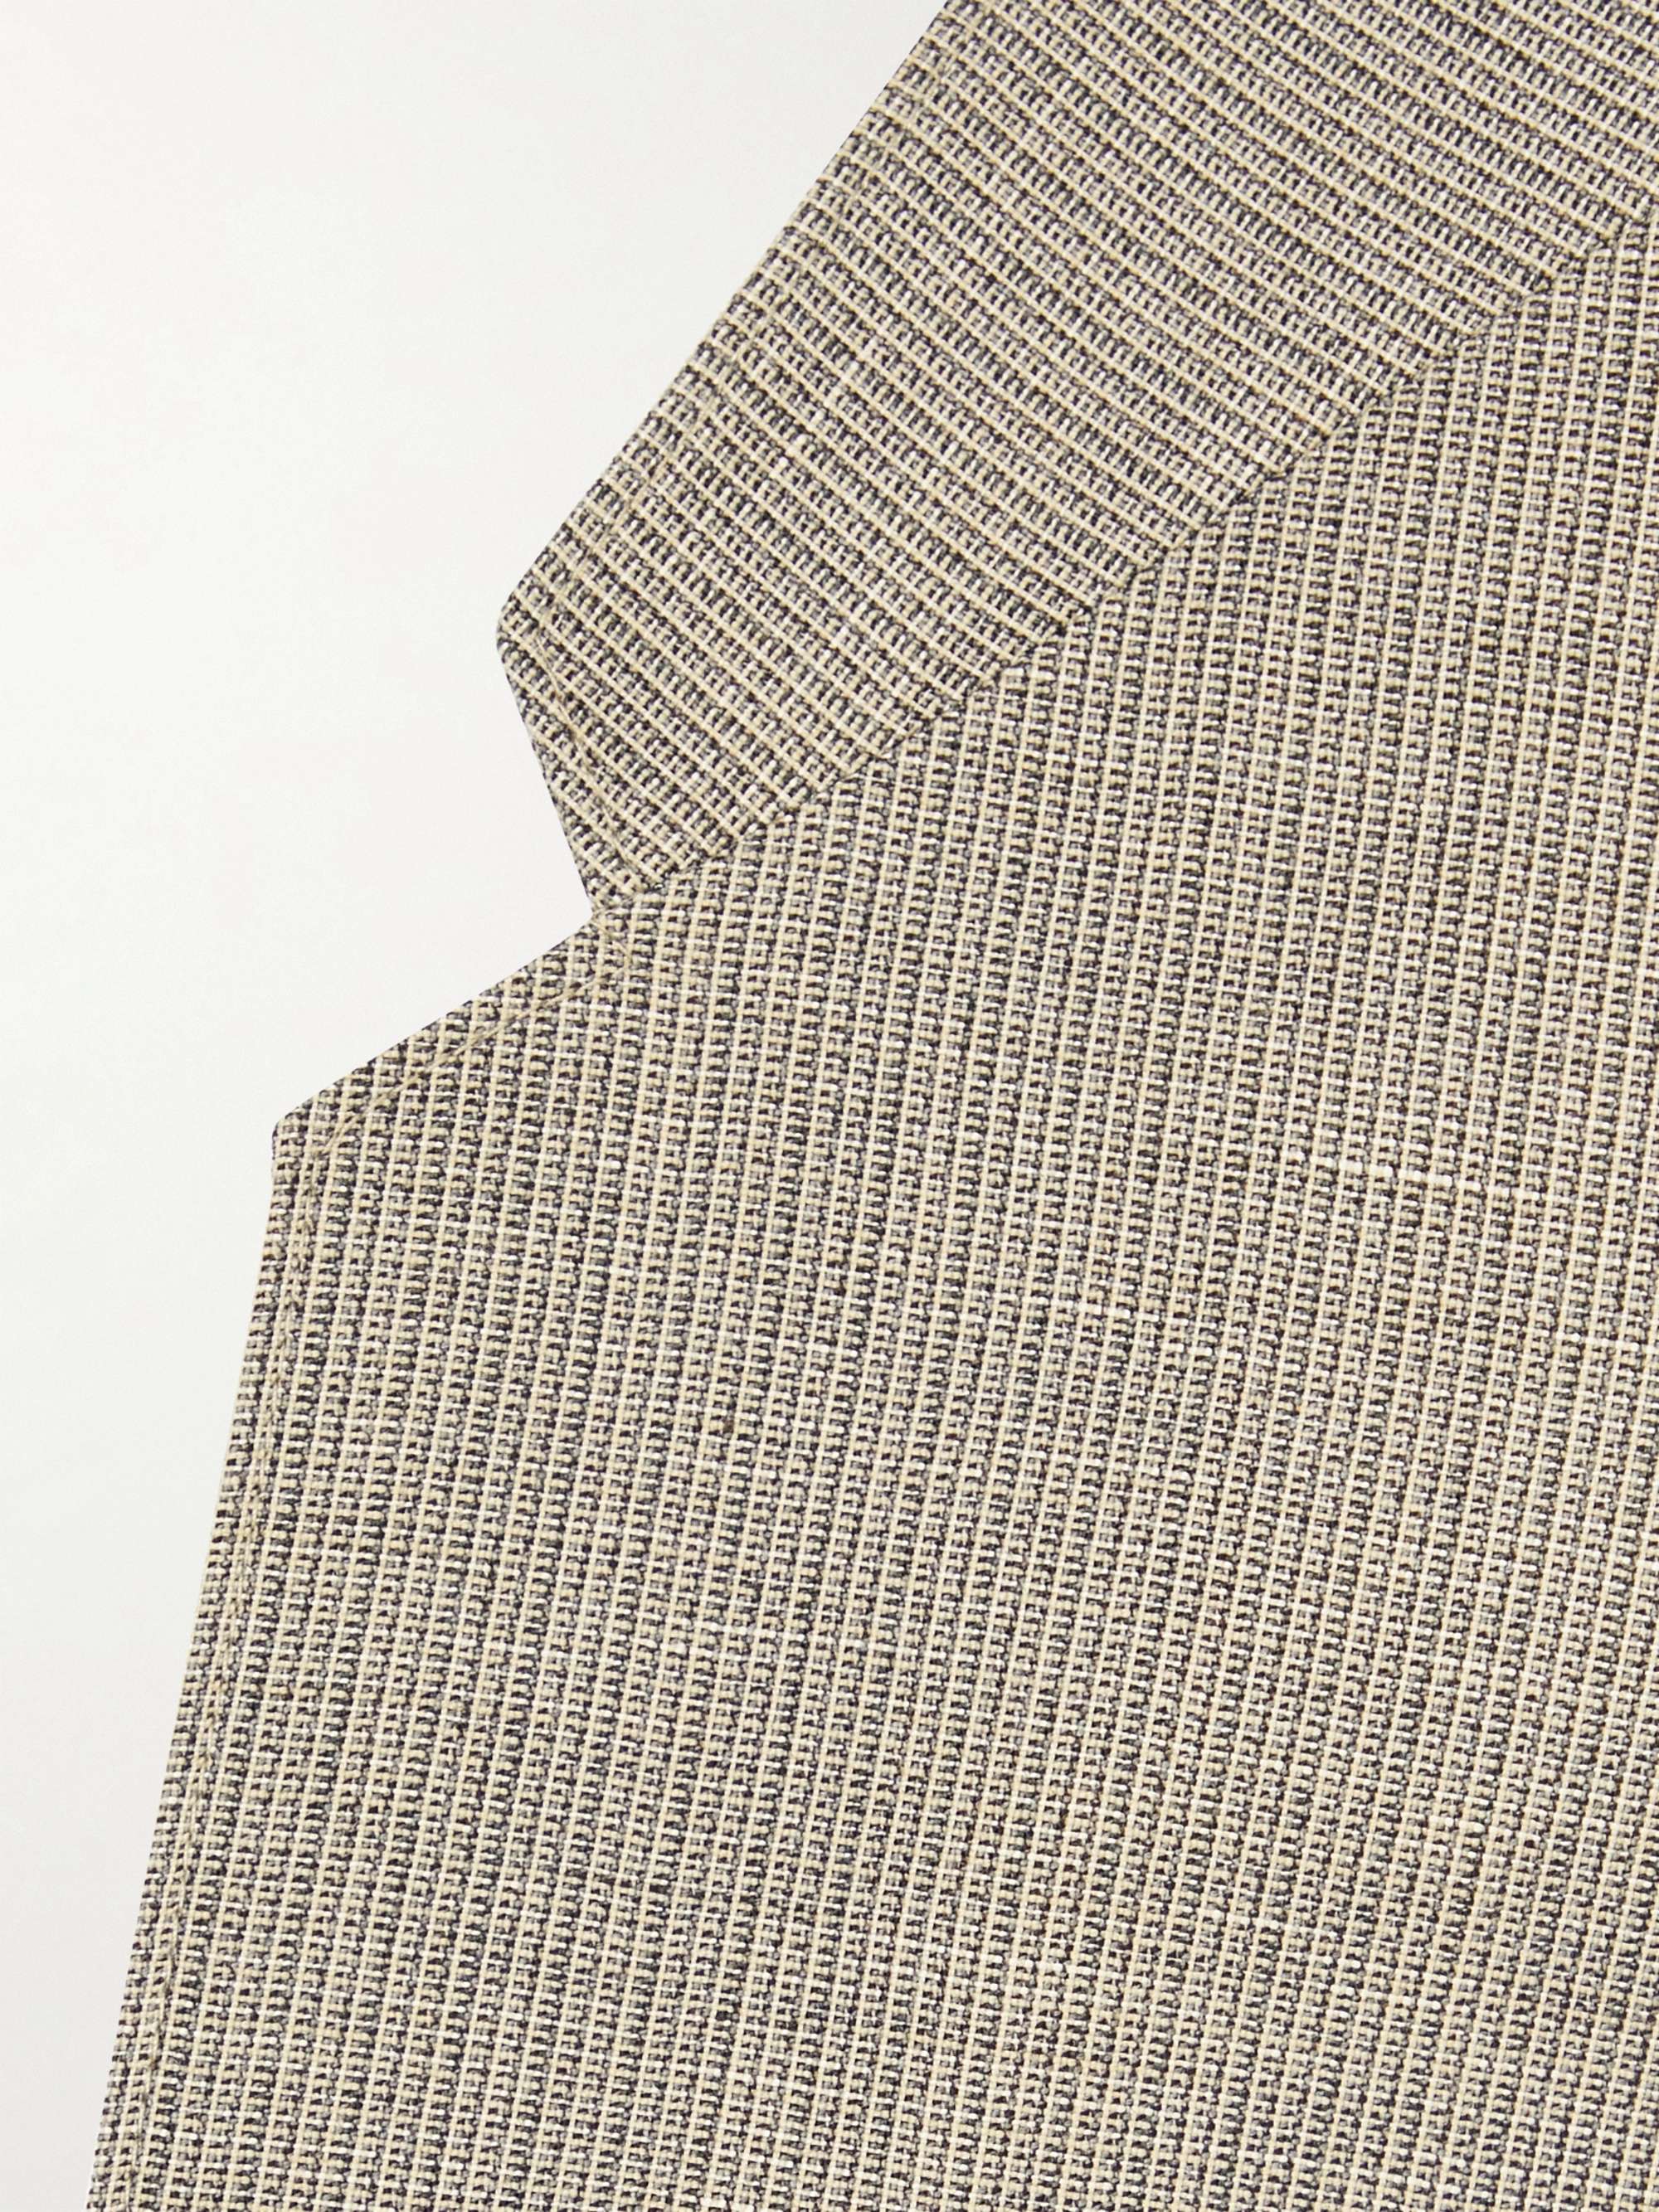 LEMAIRE Unstructured Double-Breasted Tweed Blazer